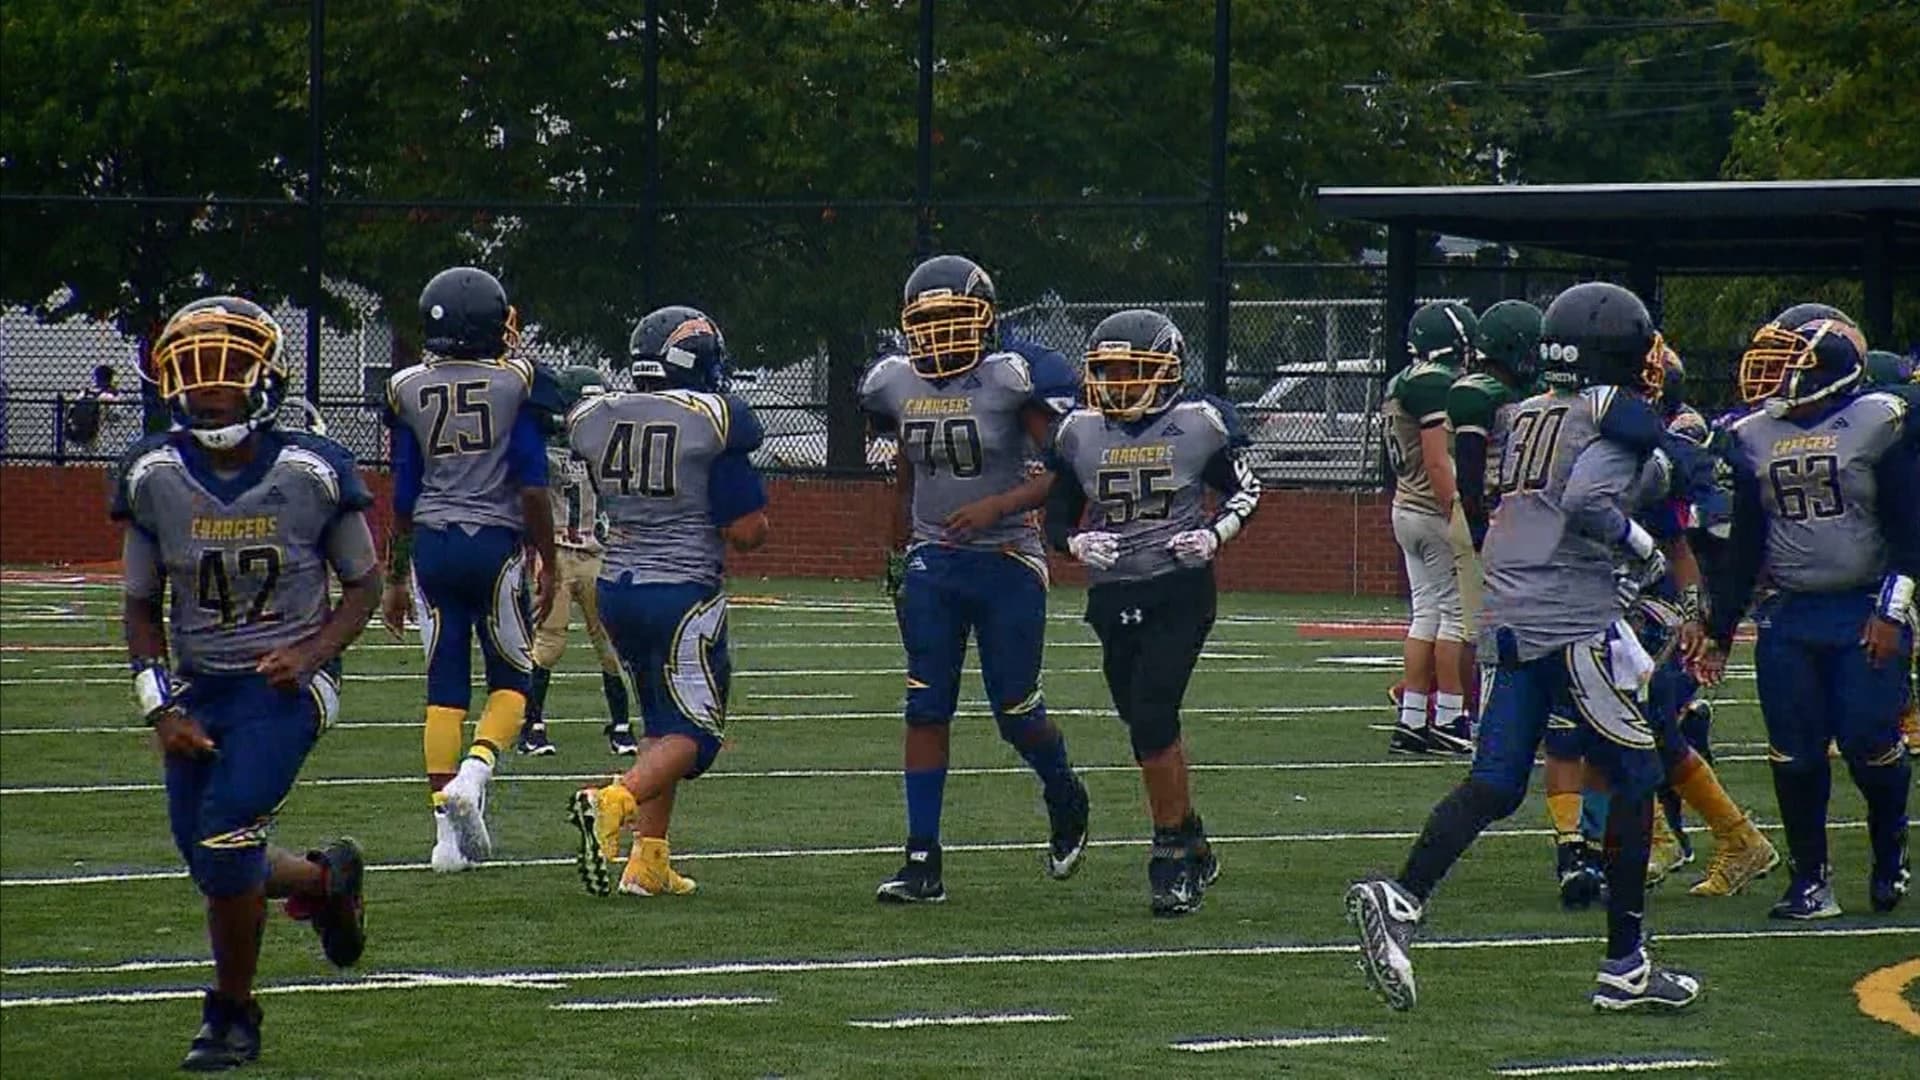 Bridgeport youth football leader: Team harassed during practice